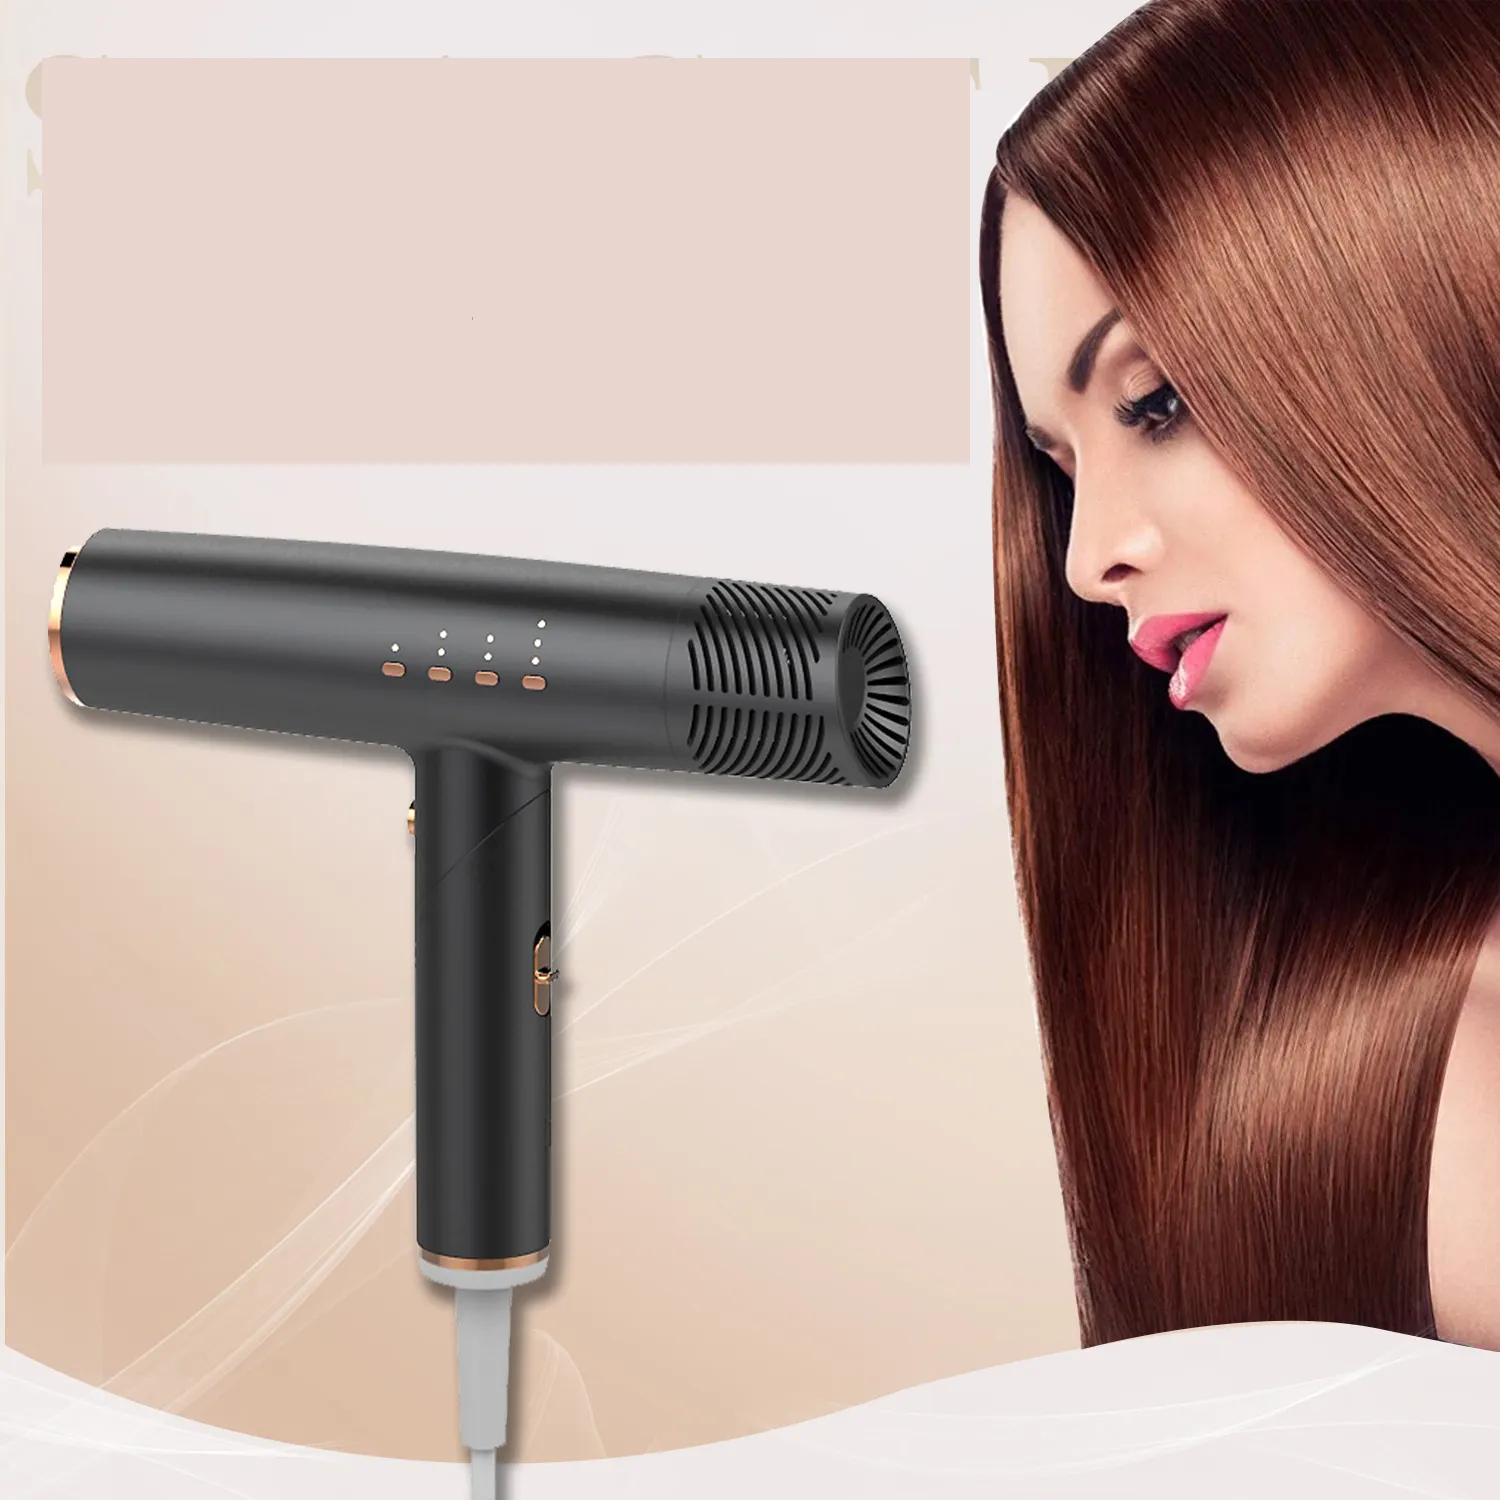 T-shape Hair Dryer High Power Negative Ionic Silent Blow Dryer Hot Cold Replace Type Hair Care Electric Hair Dryer